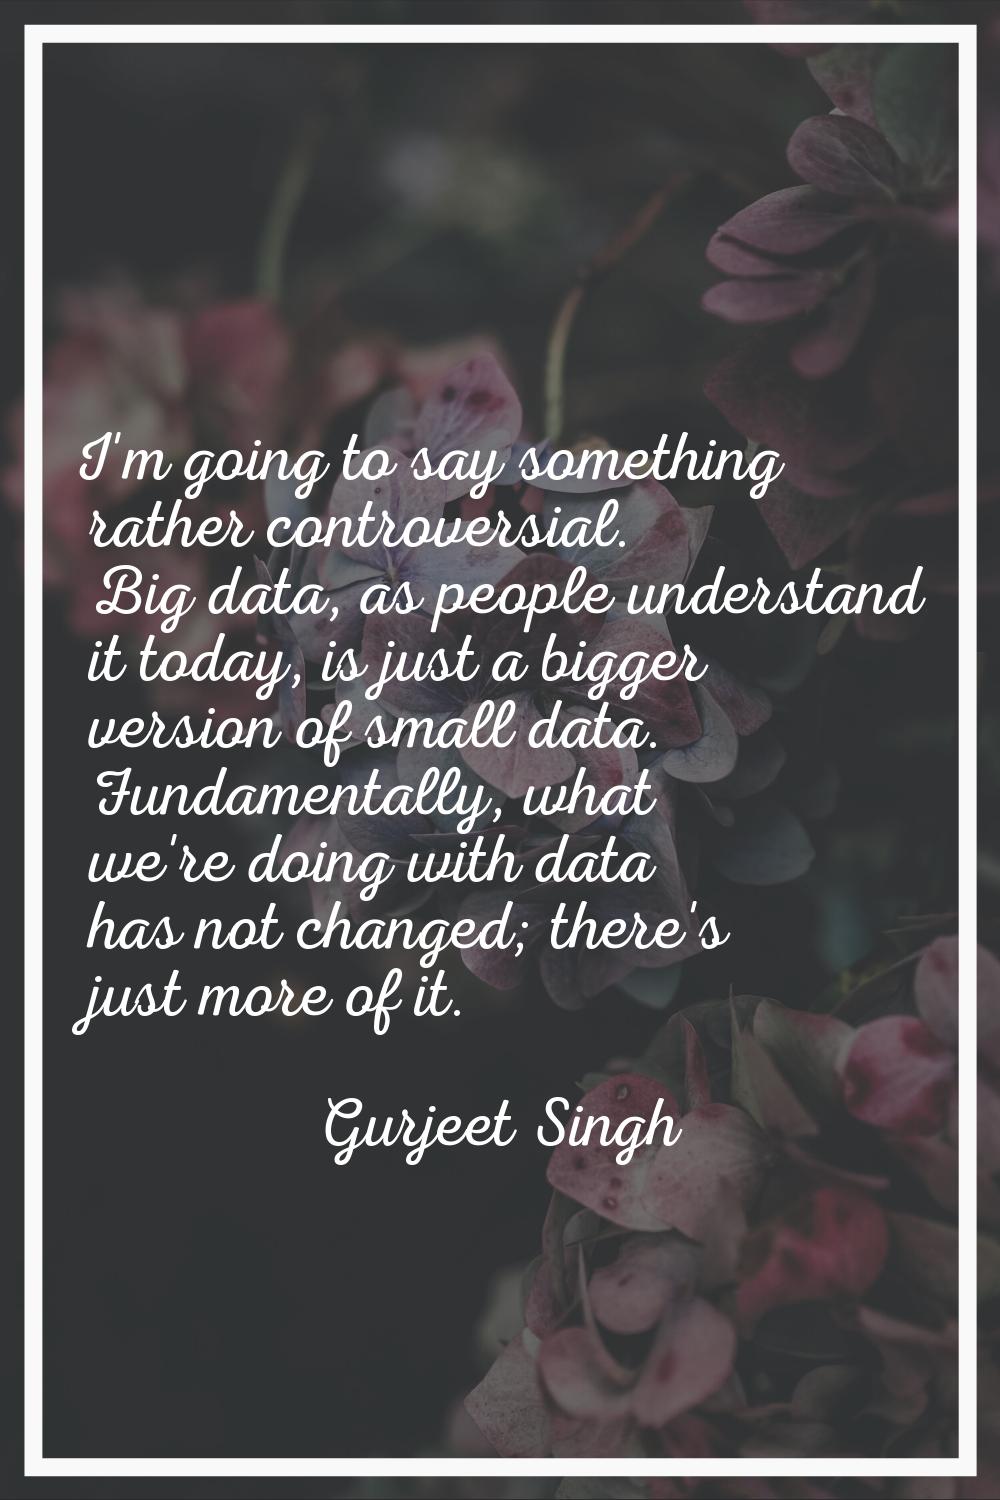 I'm going to say something rather controversial. Big data, as people understand it today, is just a